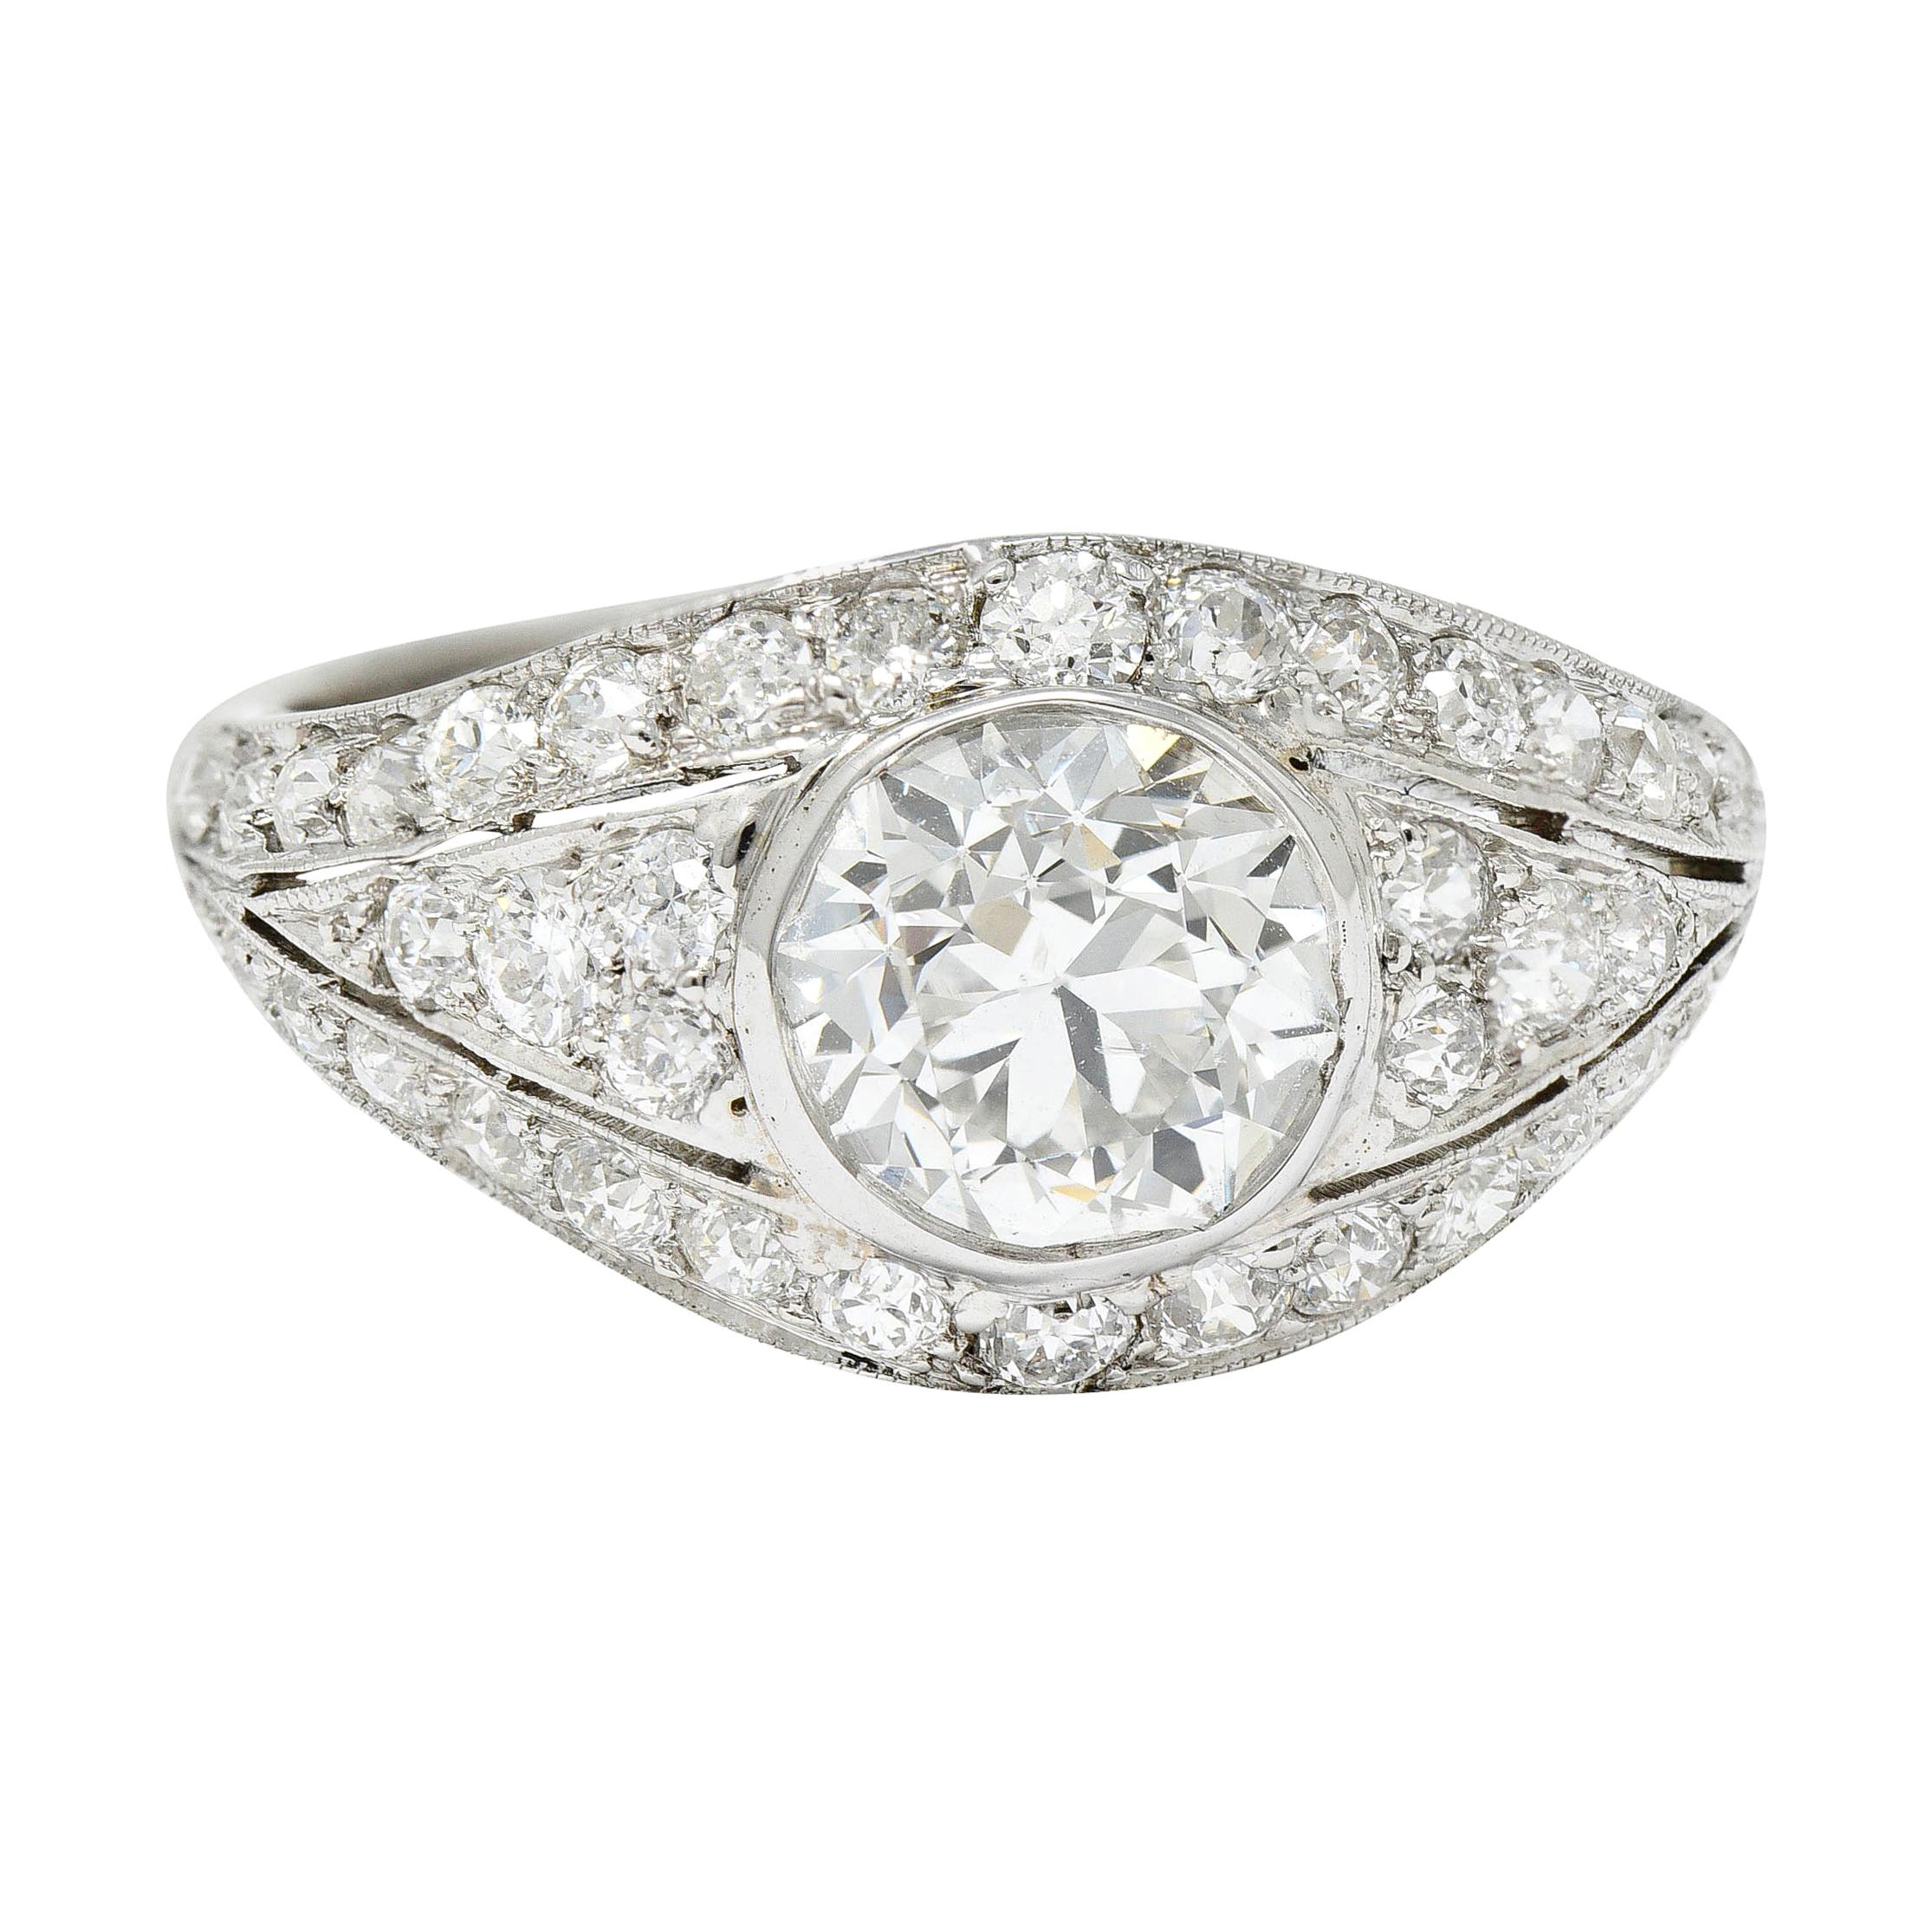 Art Deco 2.53 Carats Old European Diamond Platinum Bombe Band Ring For Sale